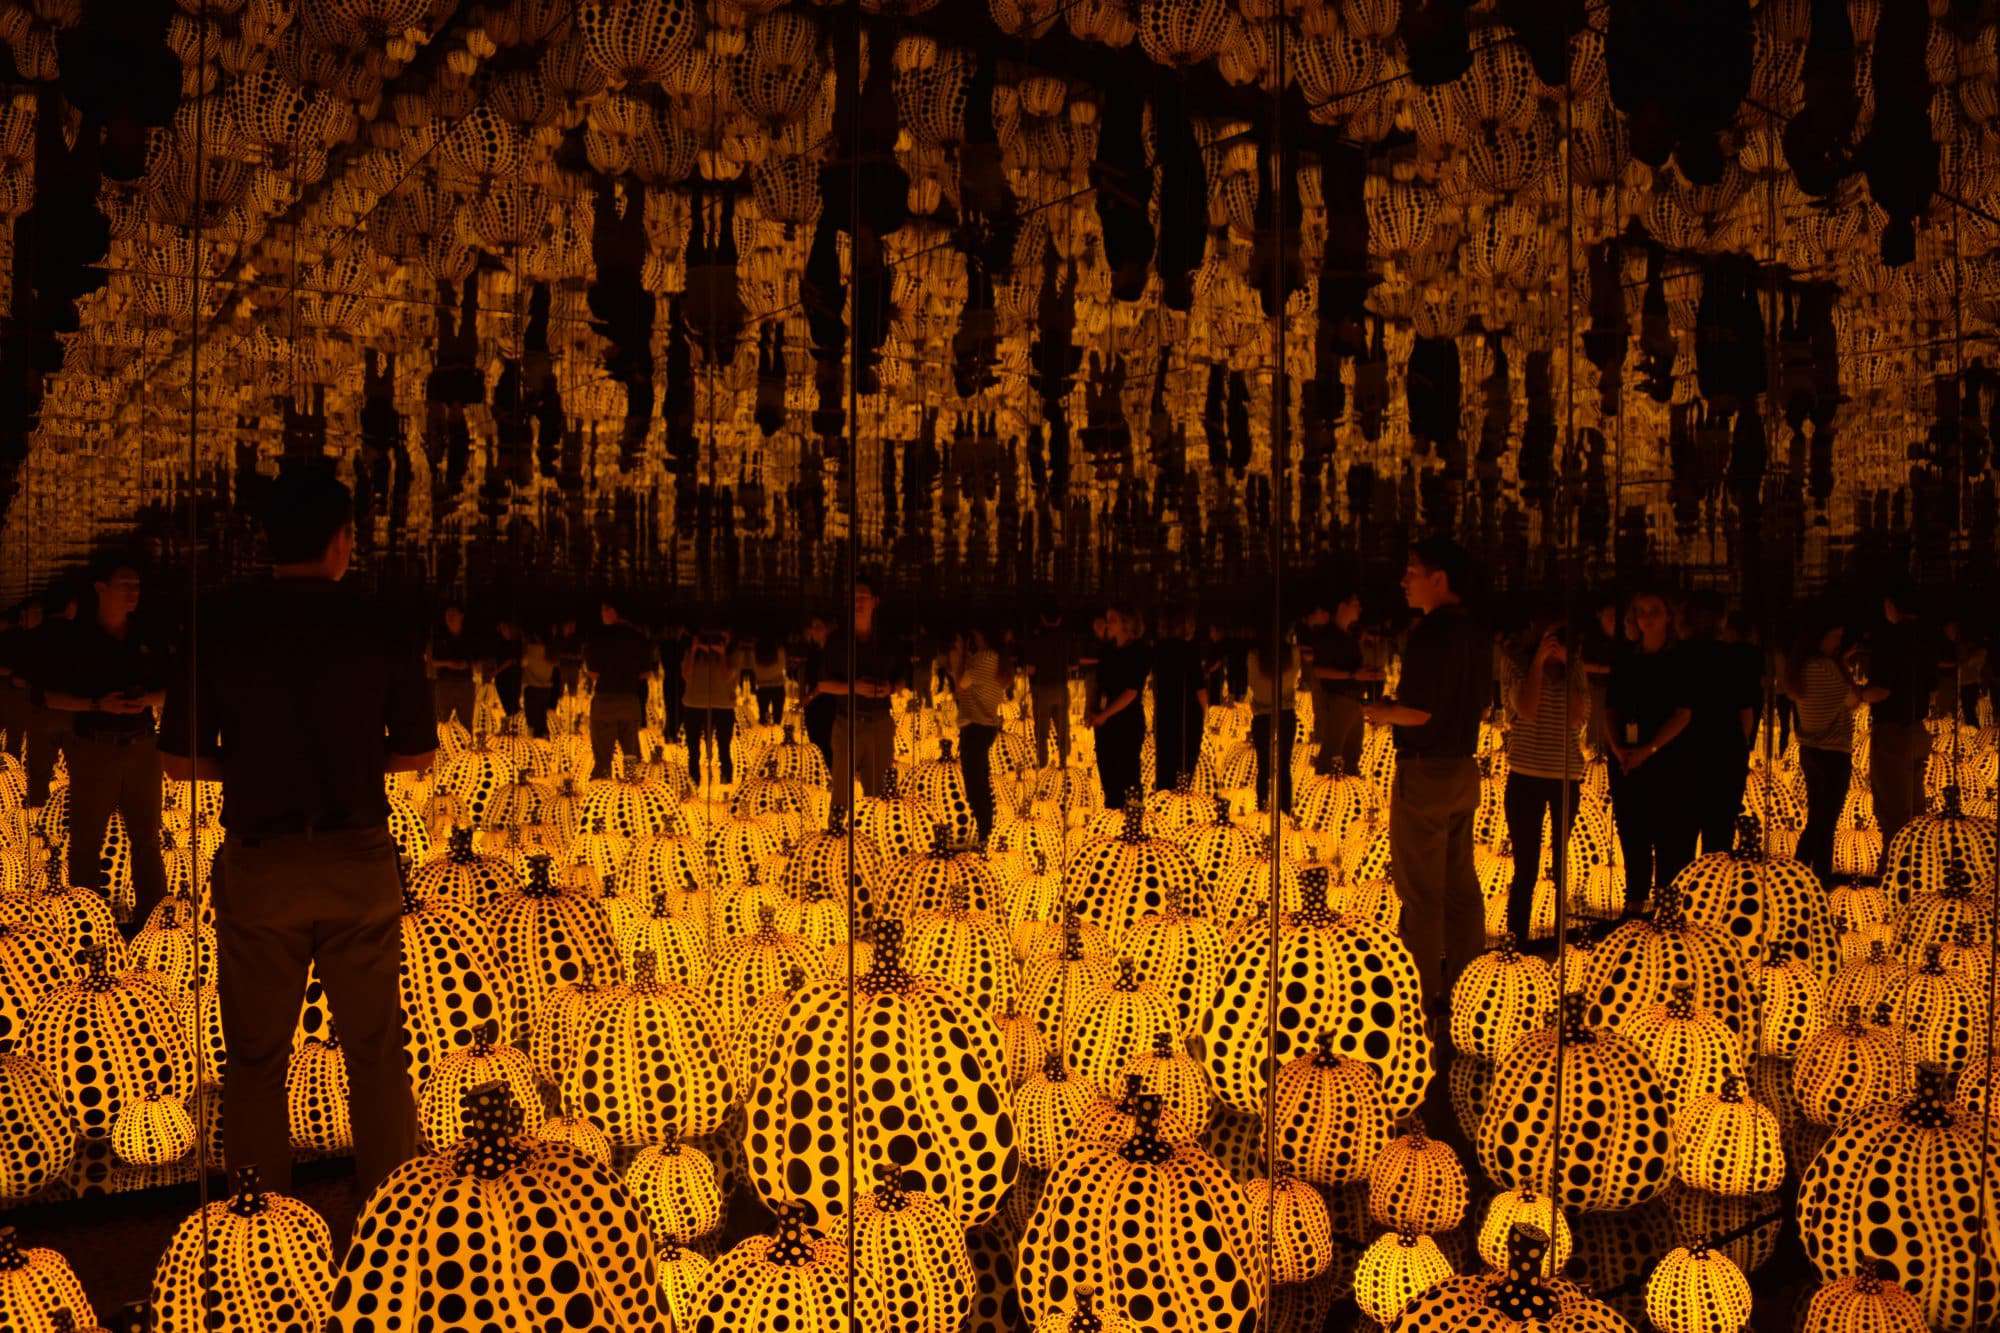 "All of the Eternal Love I Have for Pumpkins" by Yayoi Kusama at the Dallas Museum of Art. Photo by Vivian Farmer.